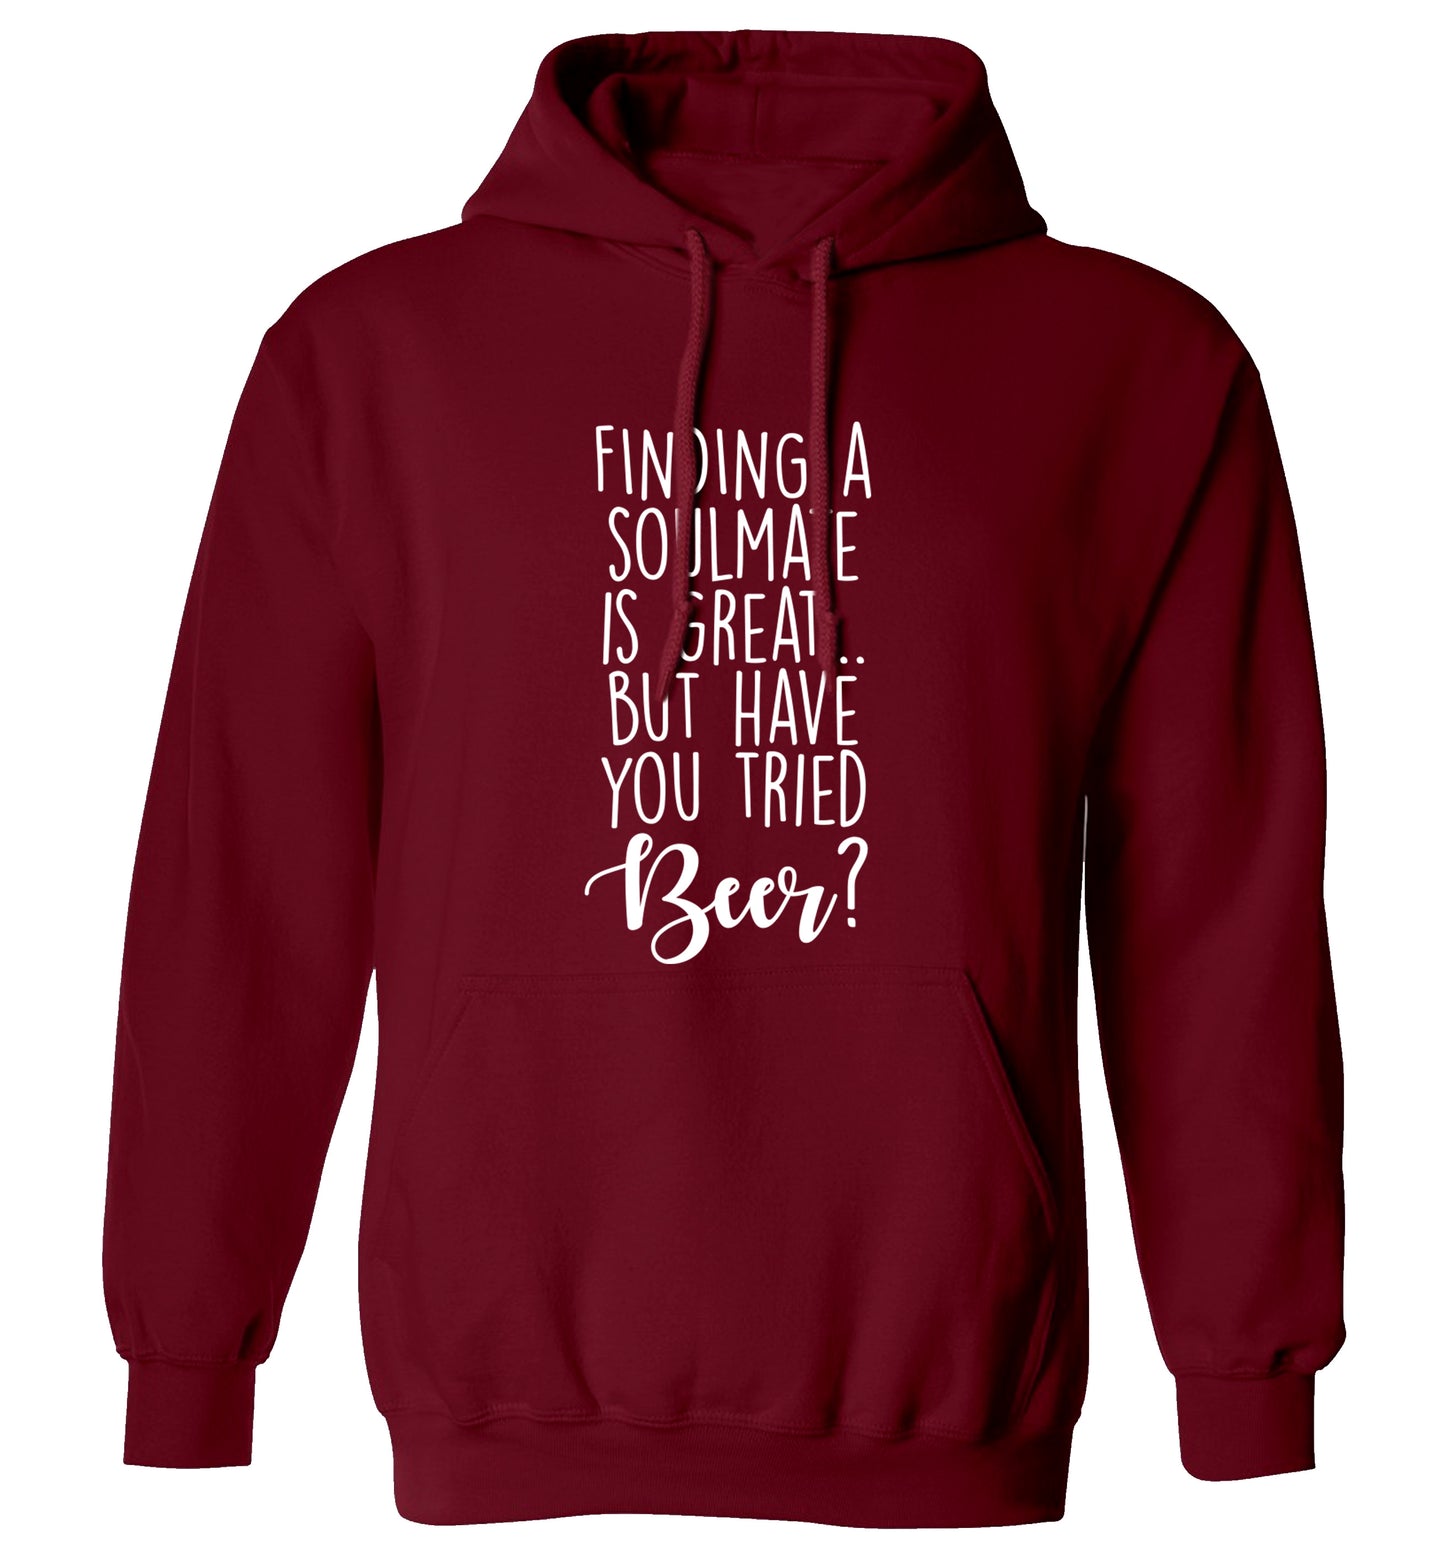 Finding a soulmate is great but have you tried beer? adults unisex maroon hoodie 2XL